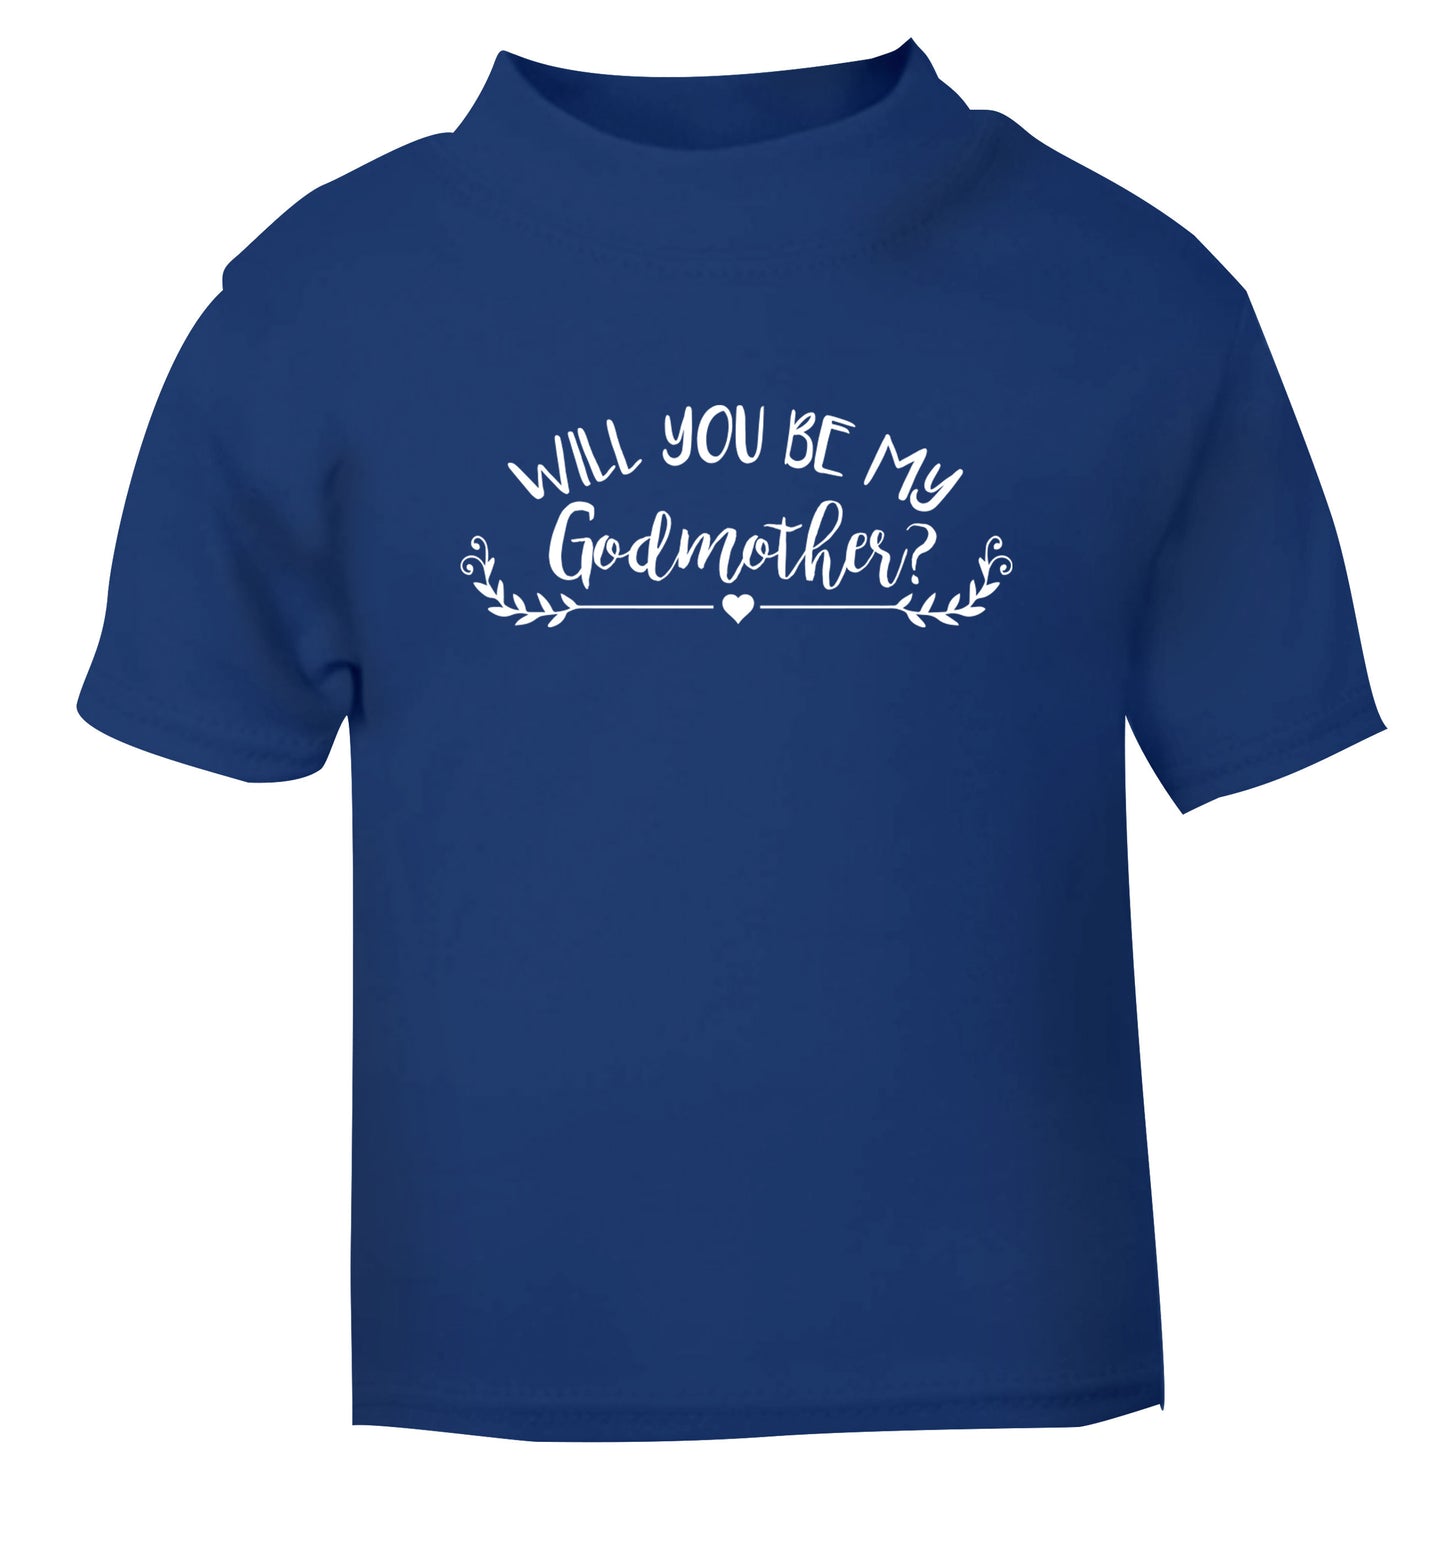 Will you be my godmother? blue Baby Toddler Tshirt 2 Years